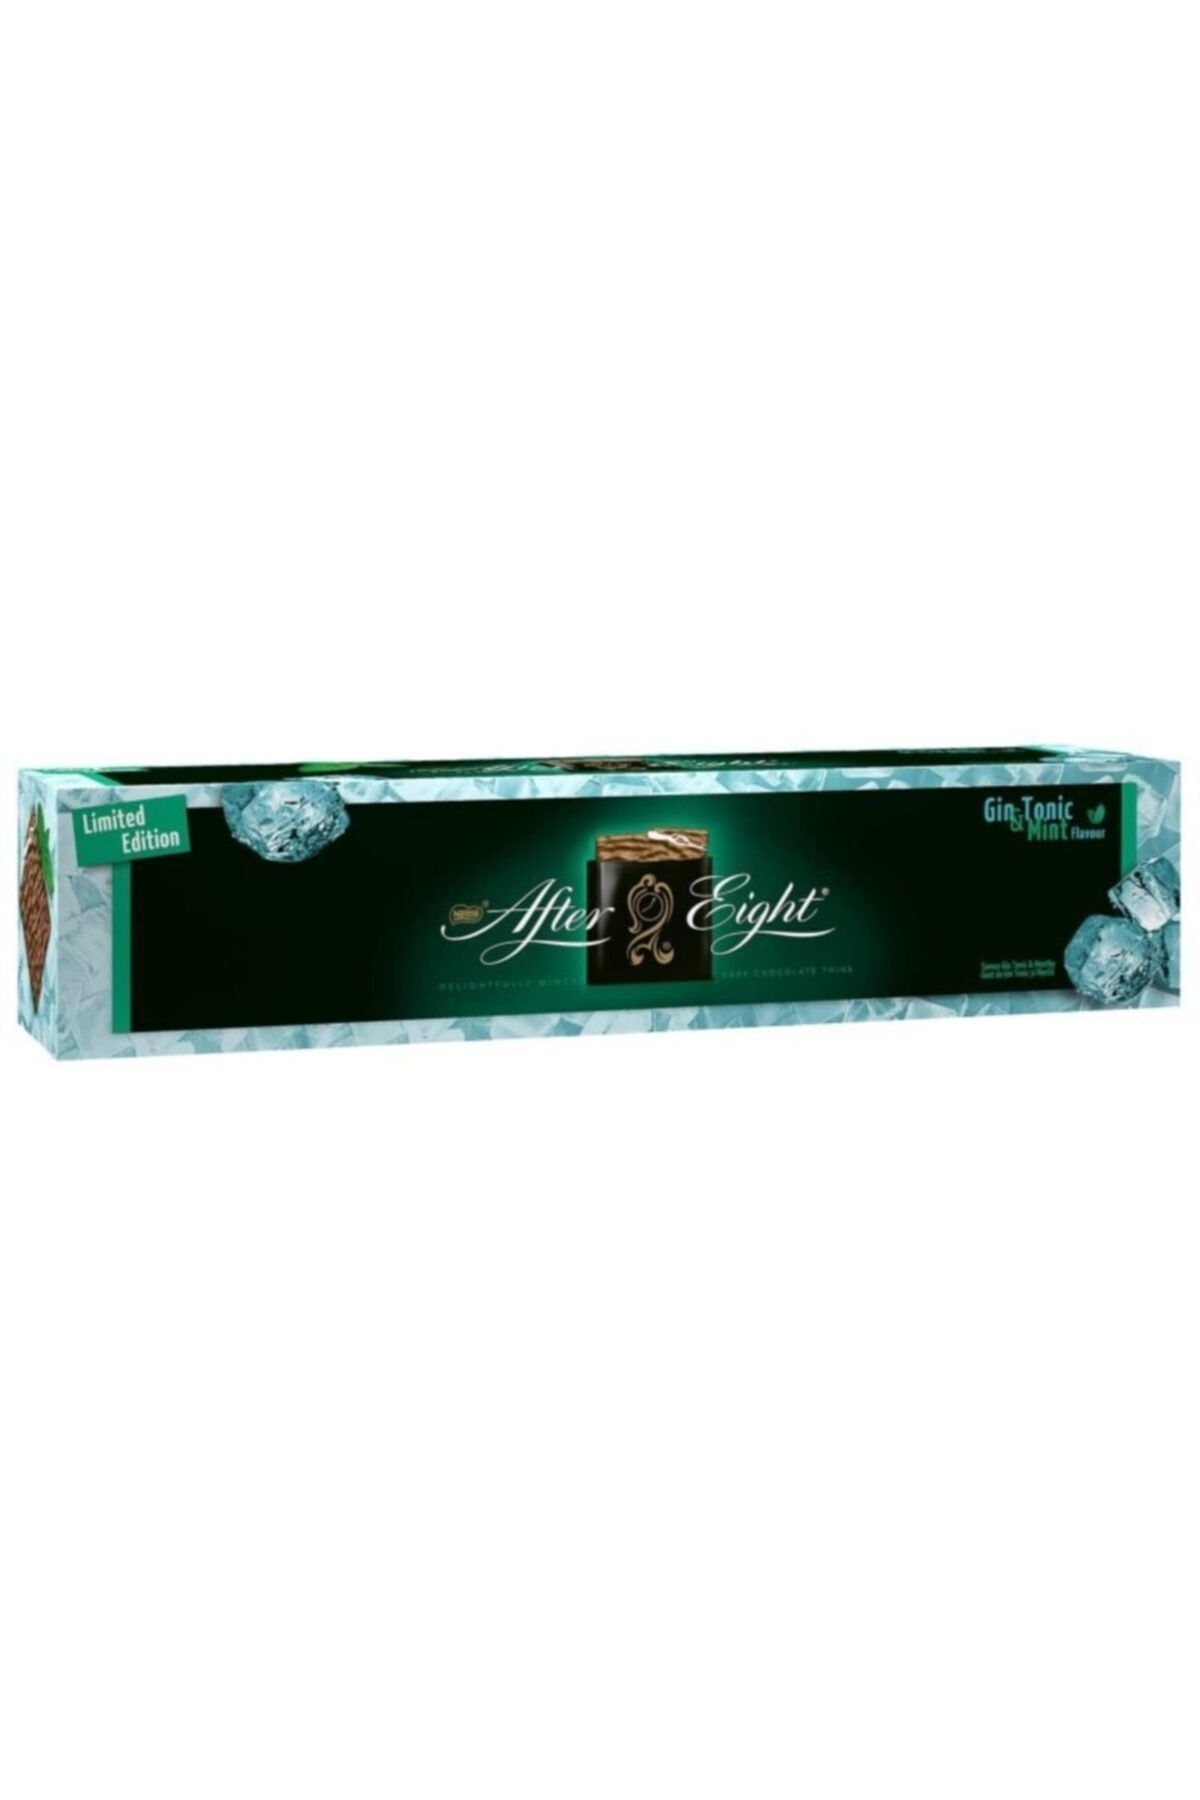 Nestle After Eight Tonic 400gr